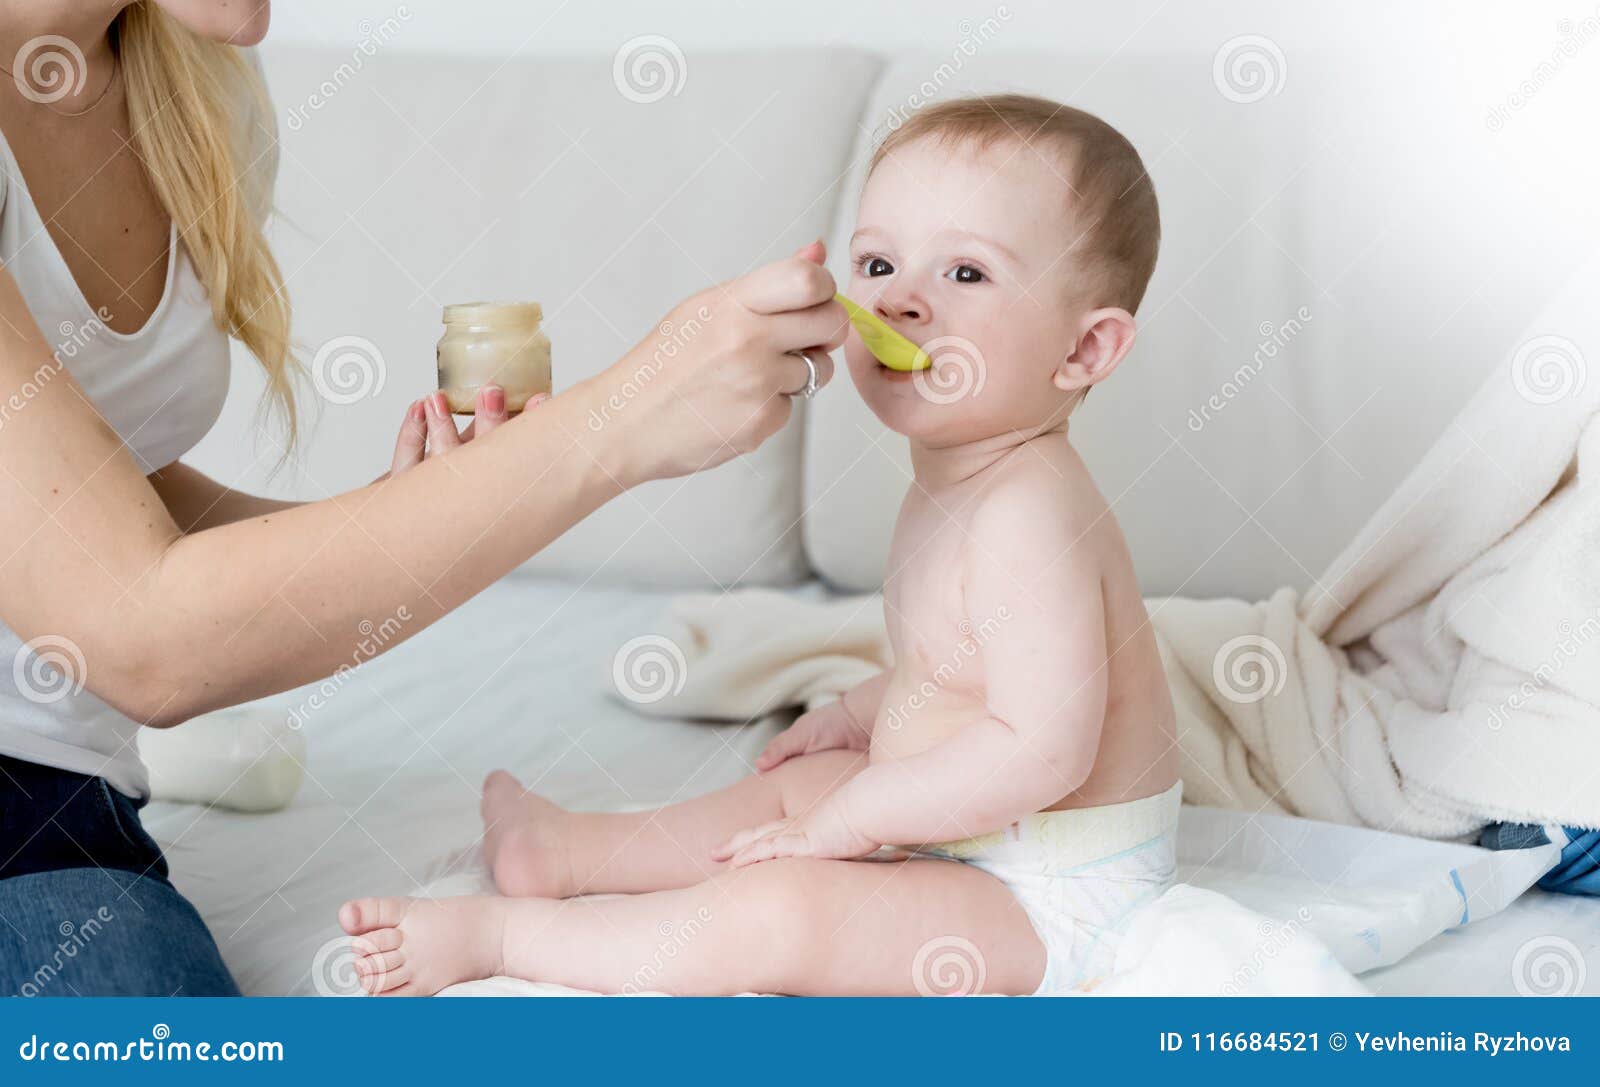 Young Mother Feeding Her Baby Son In Diapers On Sofa At ...